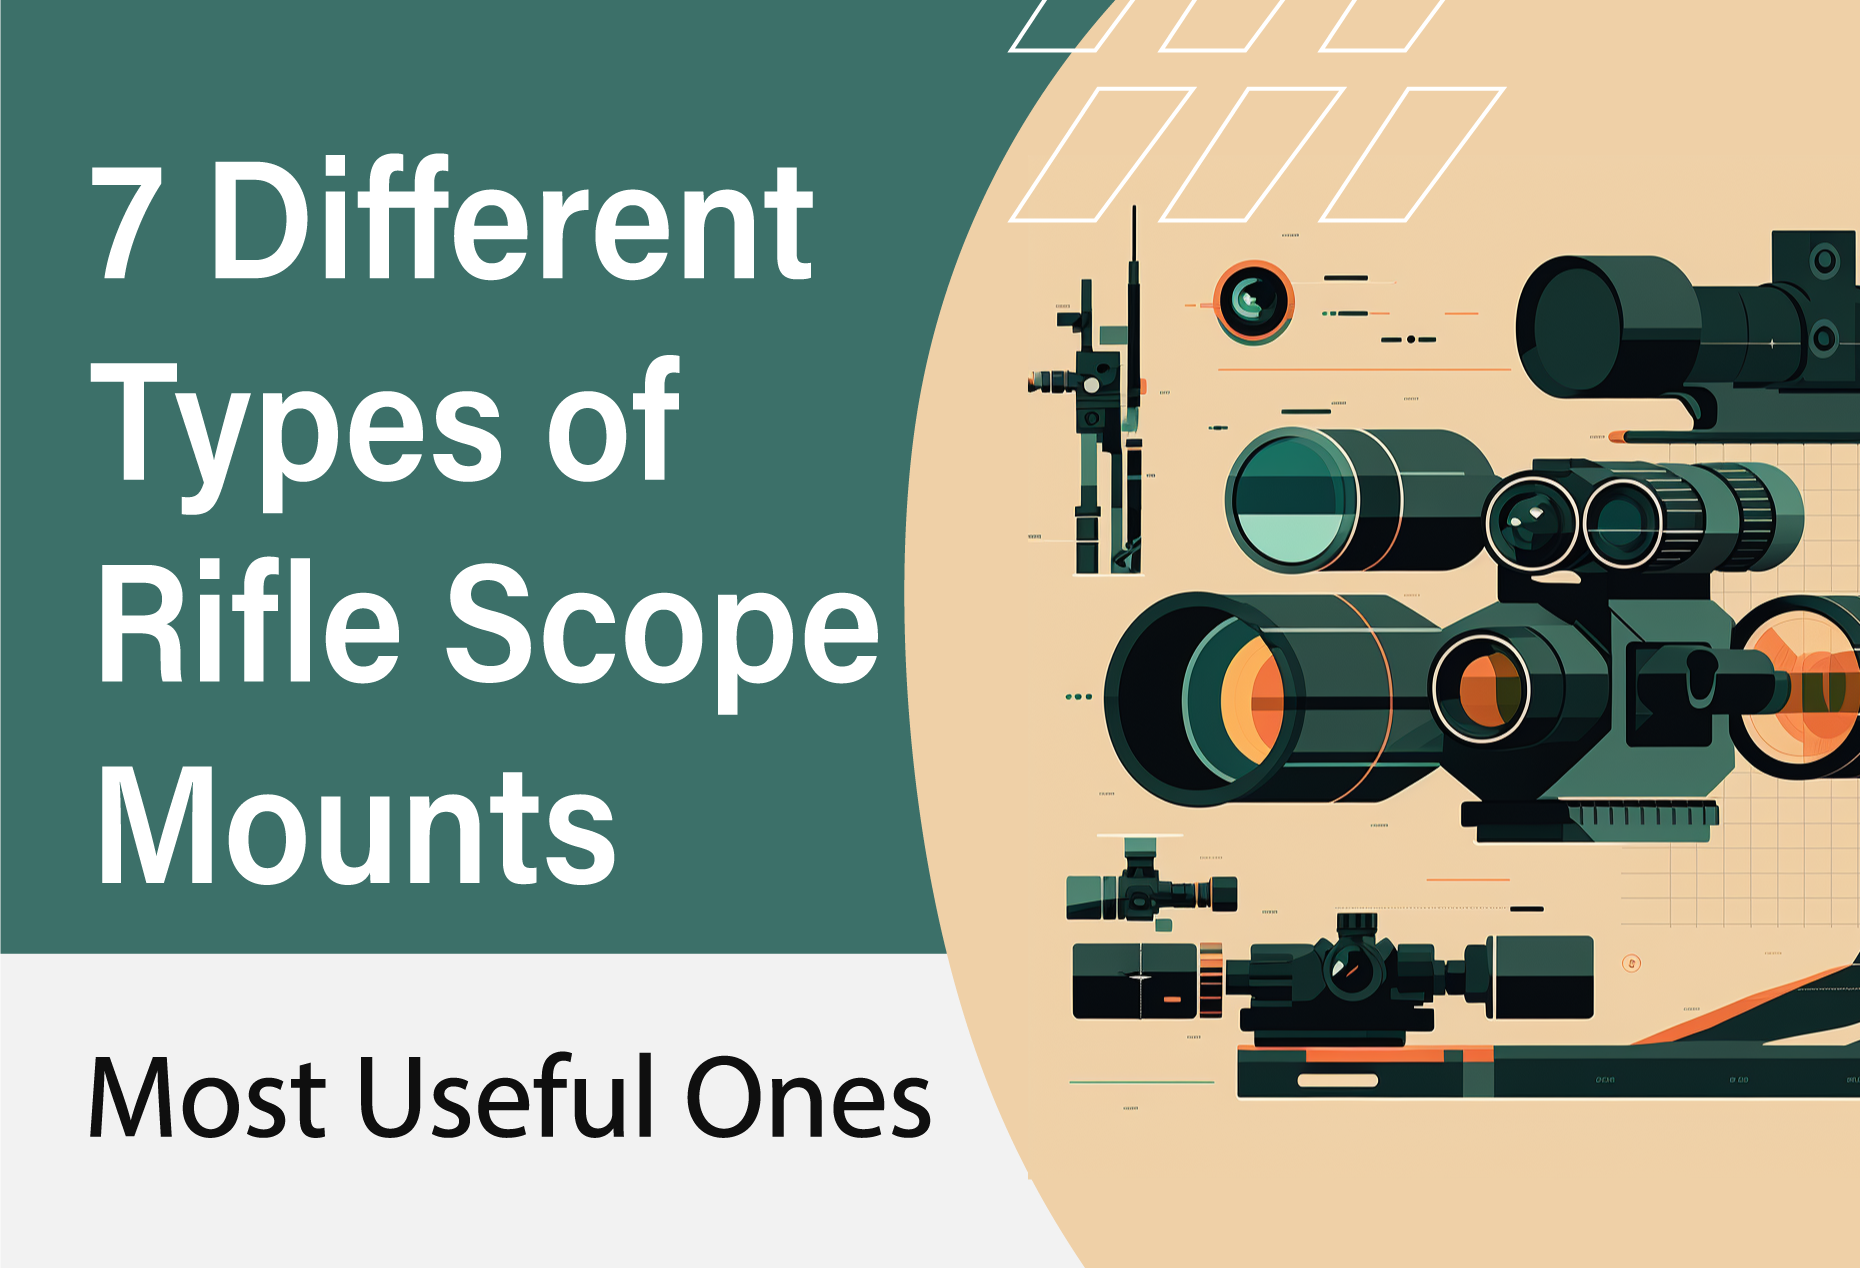 7 Different Types of Rifle Scope Mounts